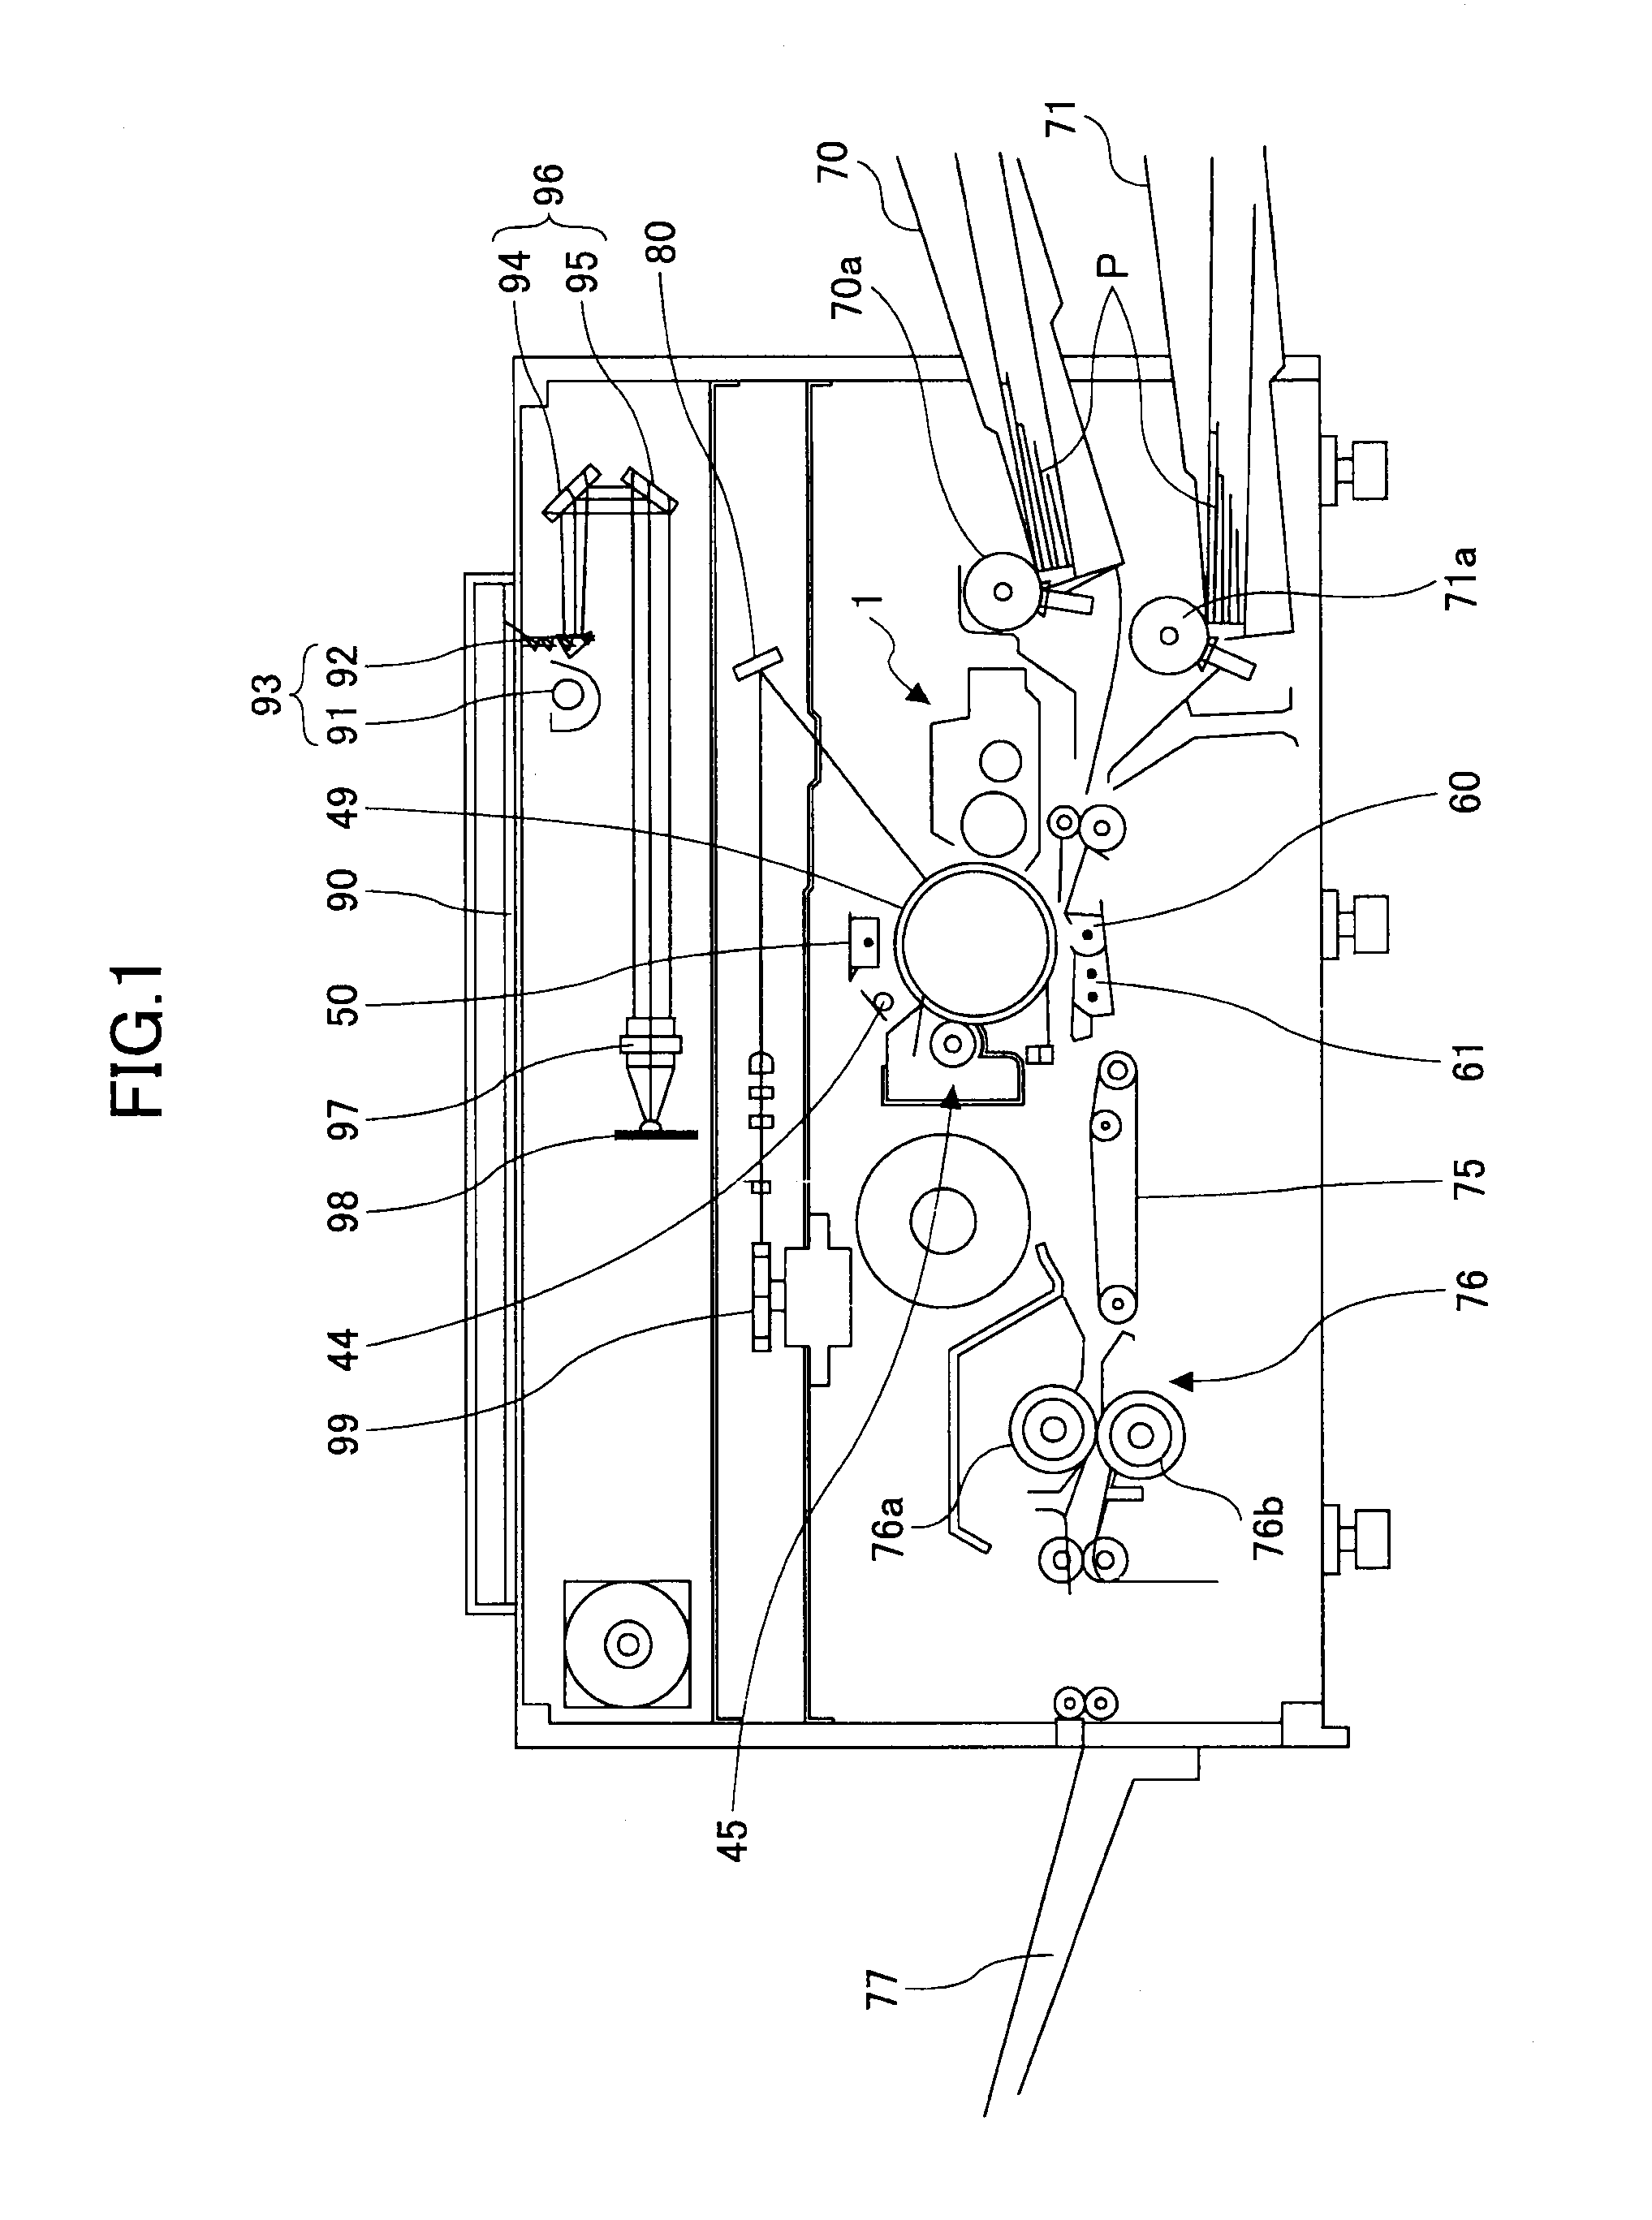 Developing device, image forming apparatus, and image forming method